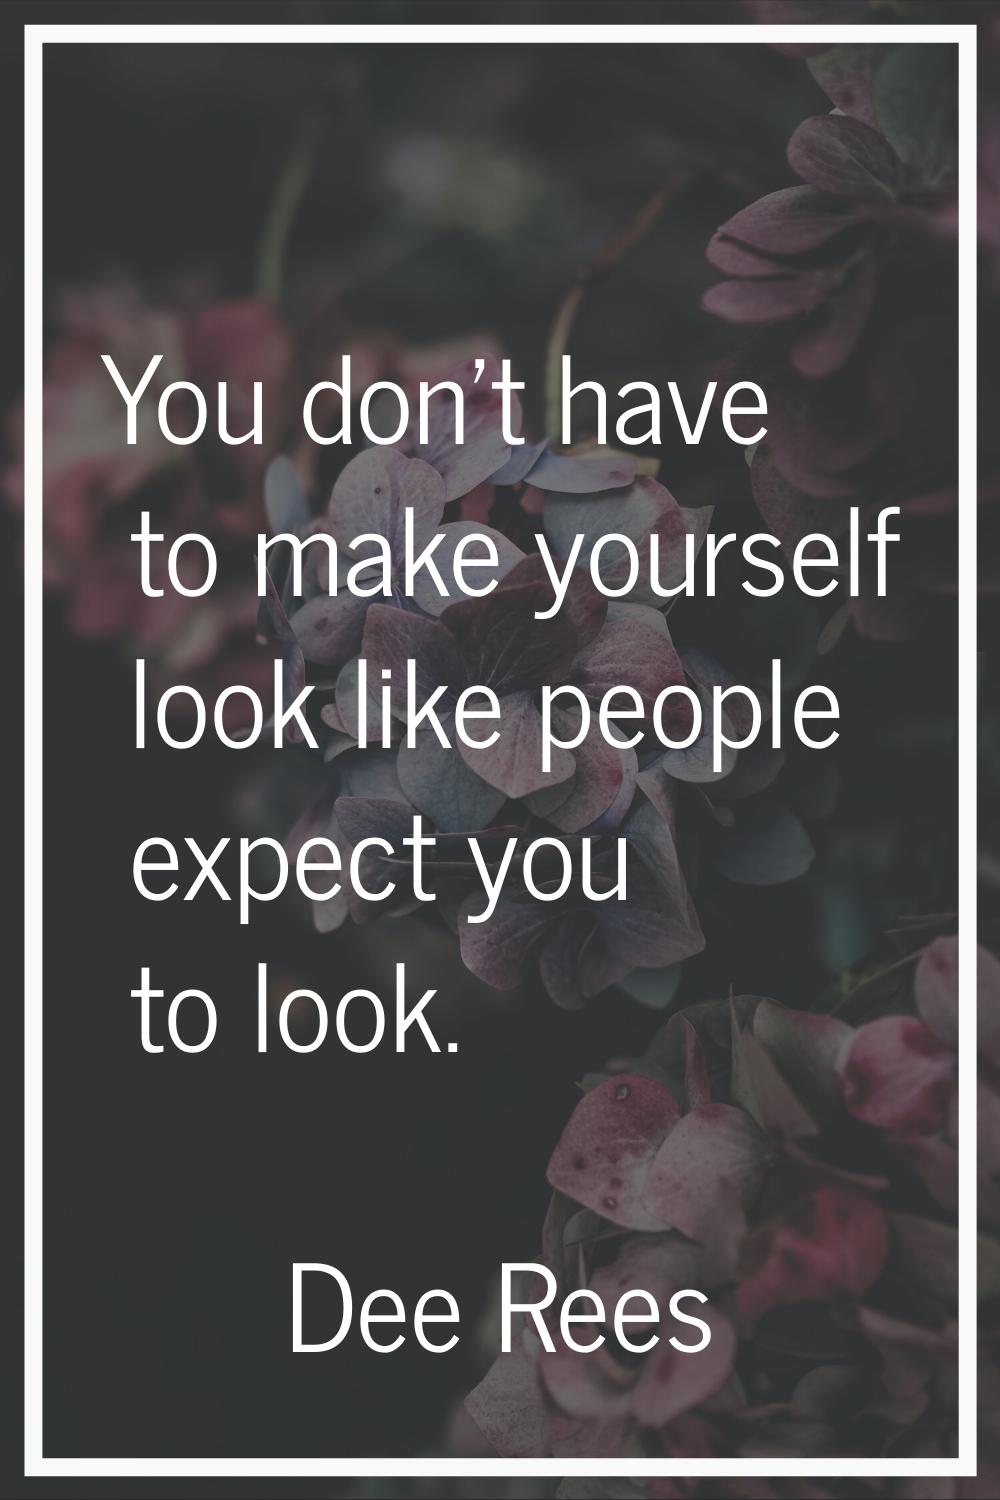 You don't have to make yourself look like people expect you to look.